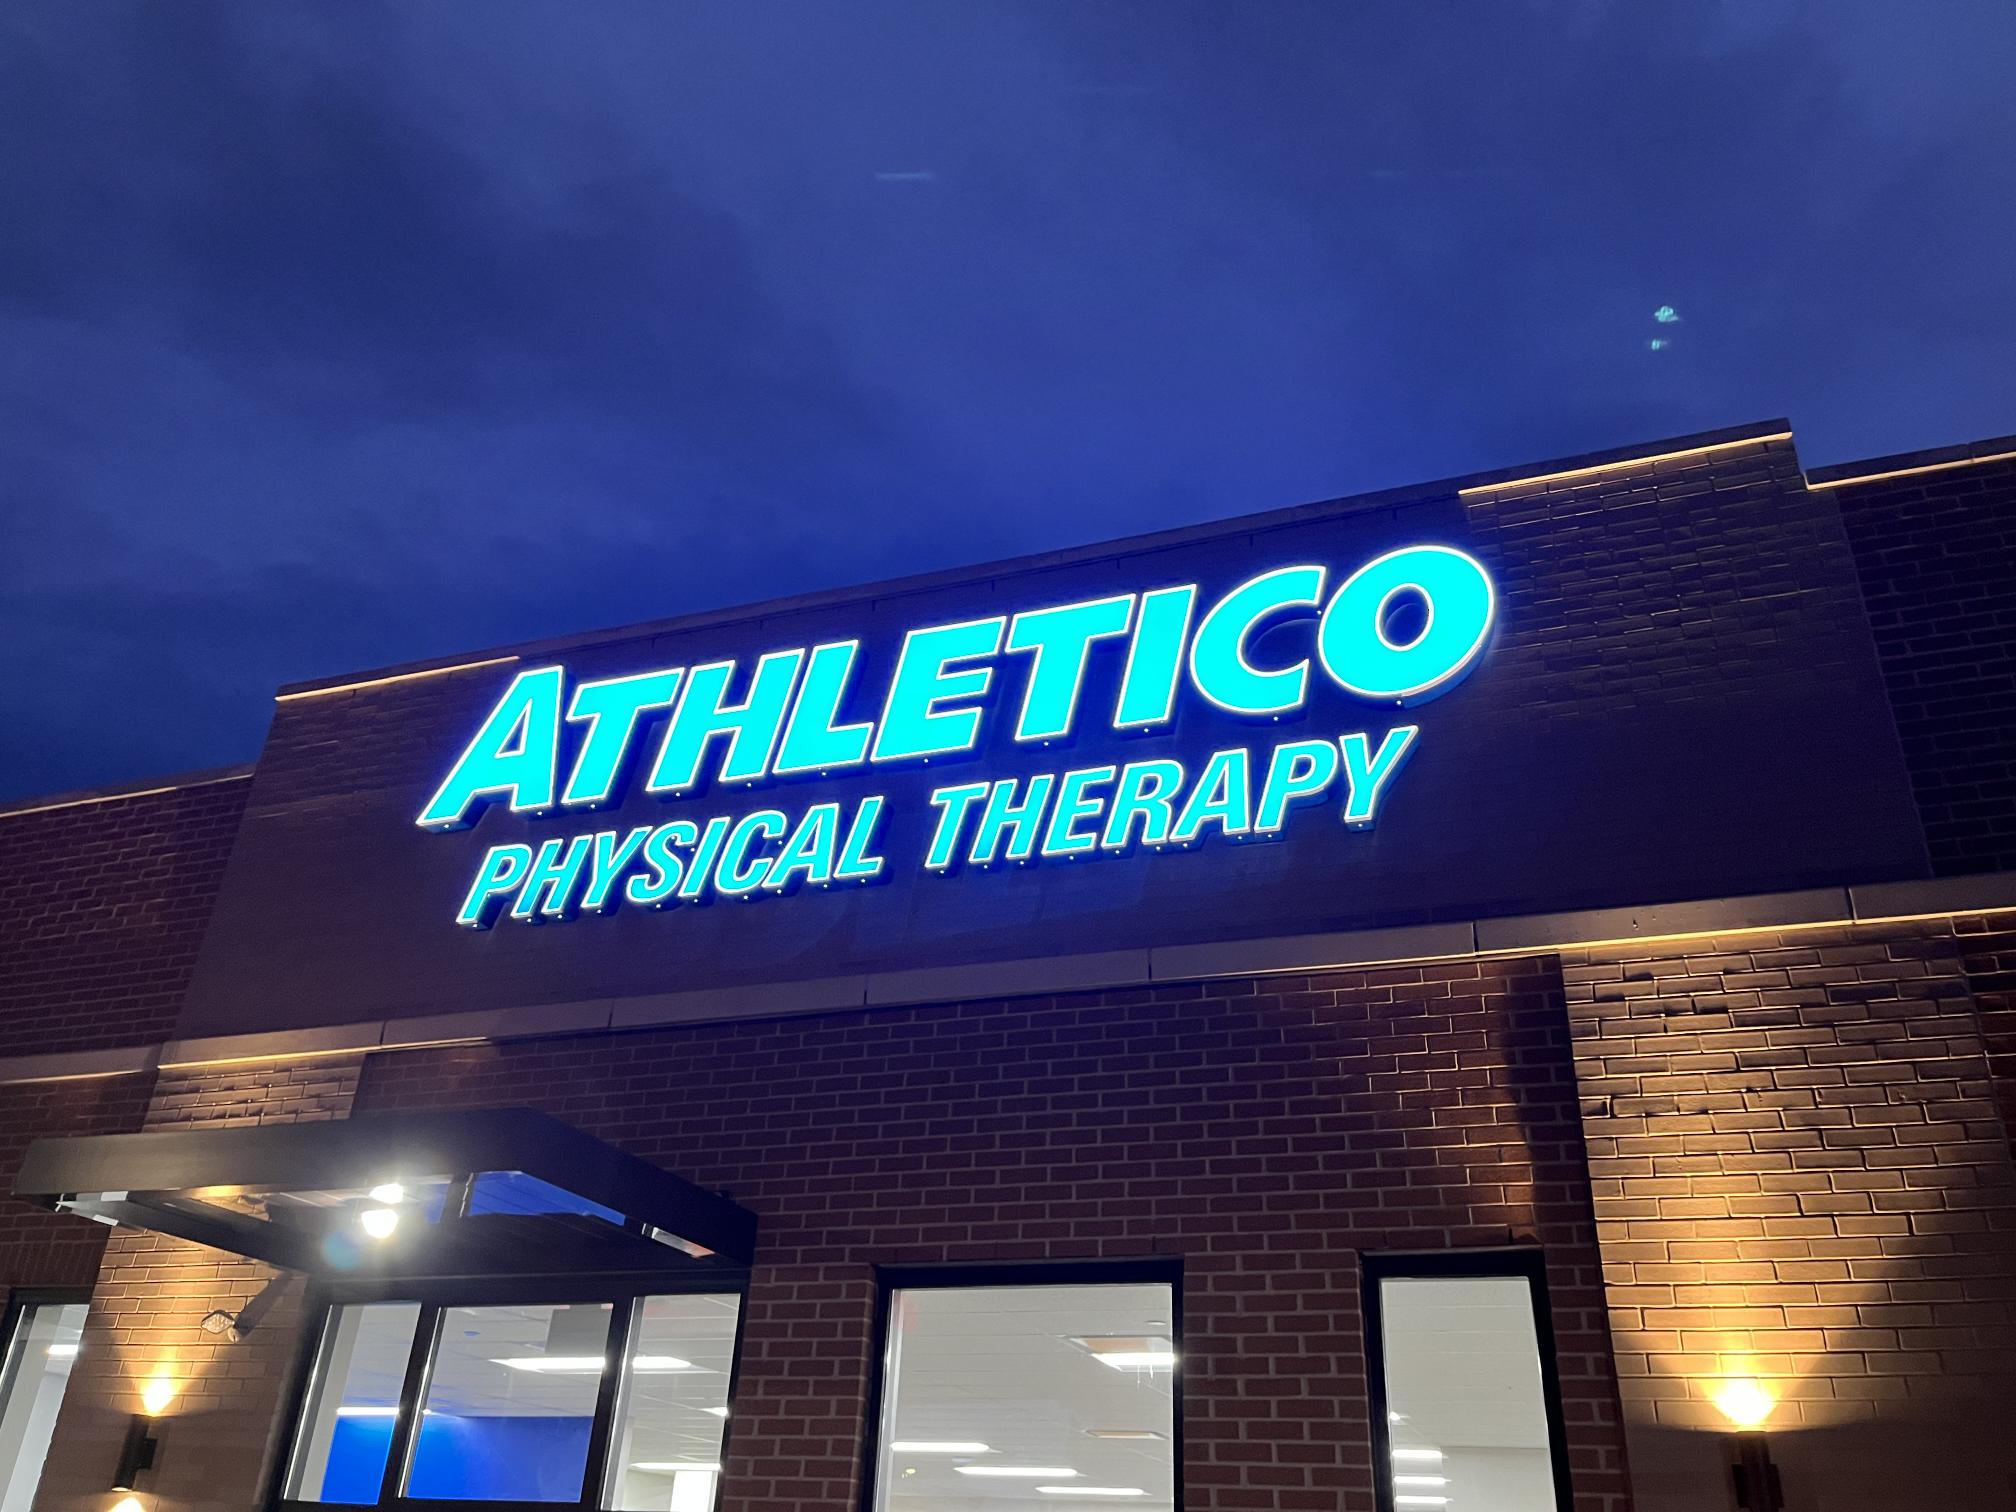 Athletico Physical Therapy South Bend North Indiana